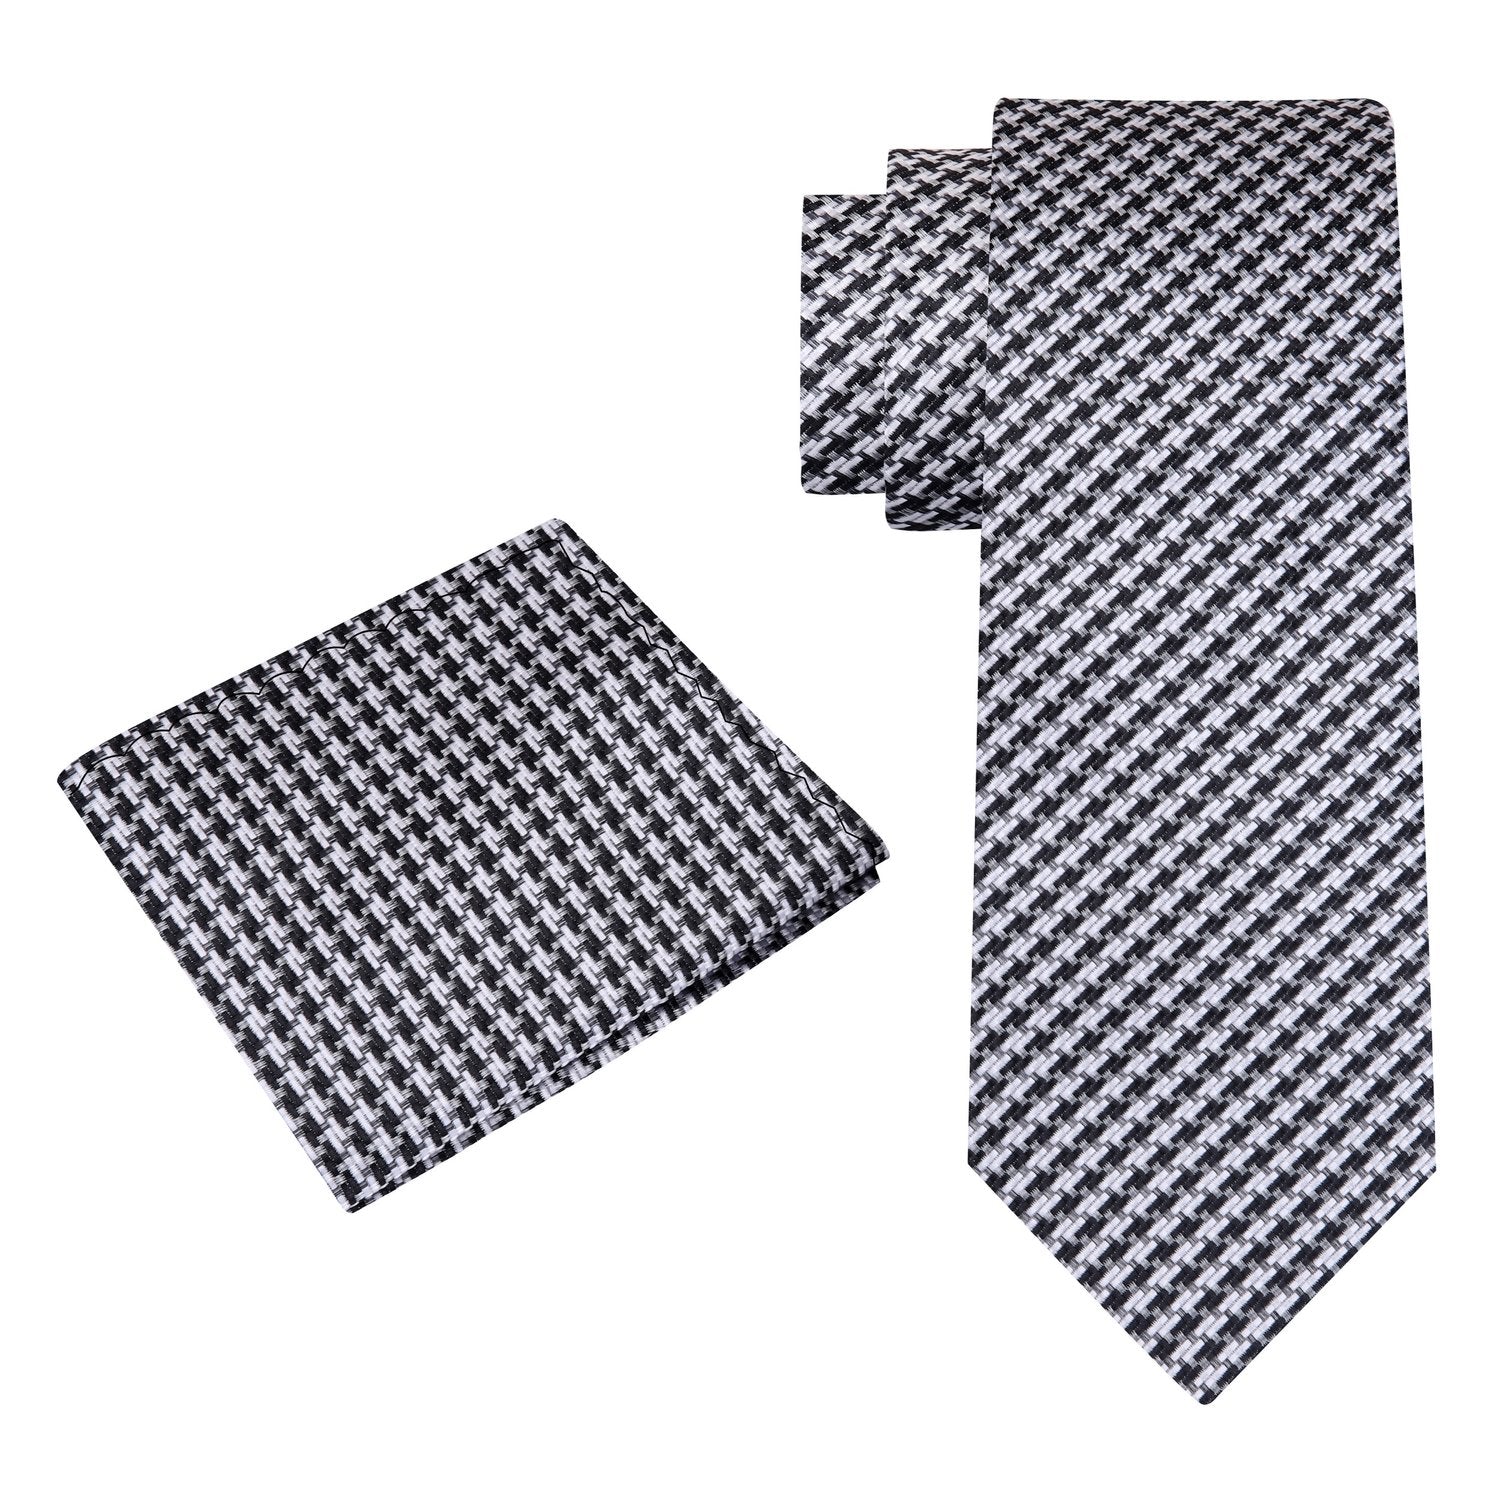 Alt View: Black, Grey Hounds Tooth Tie and Square